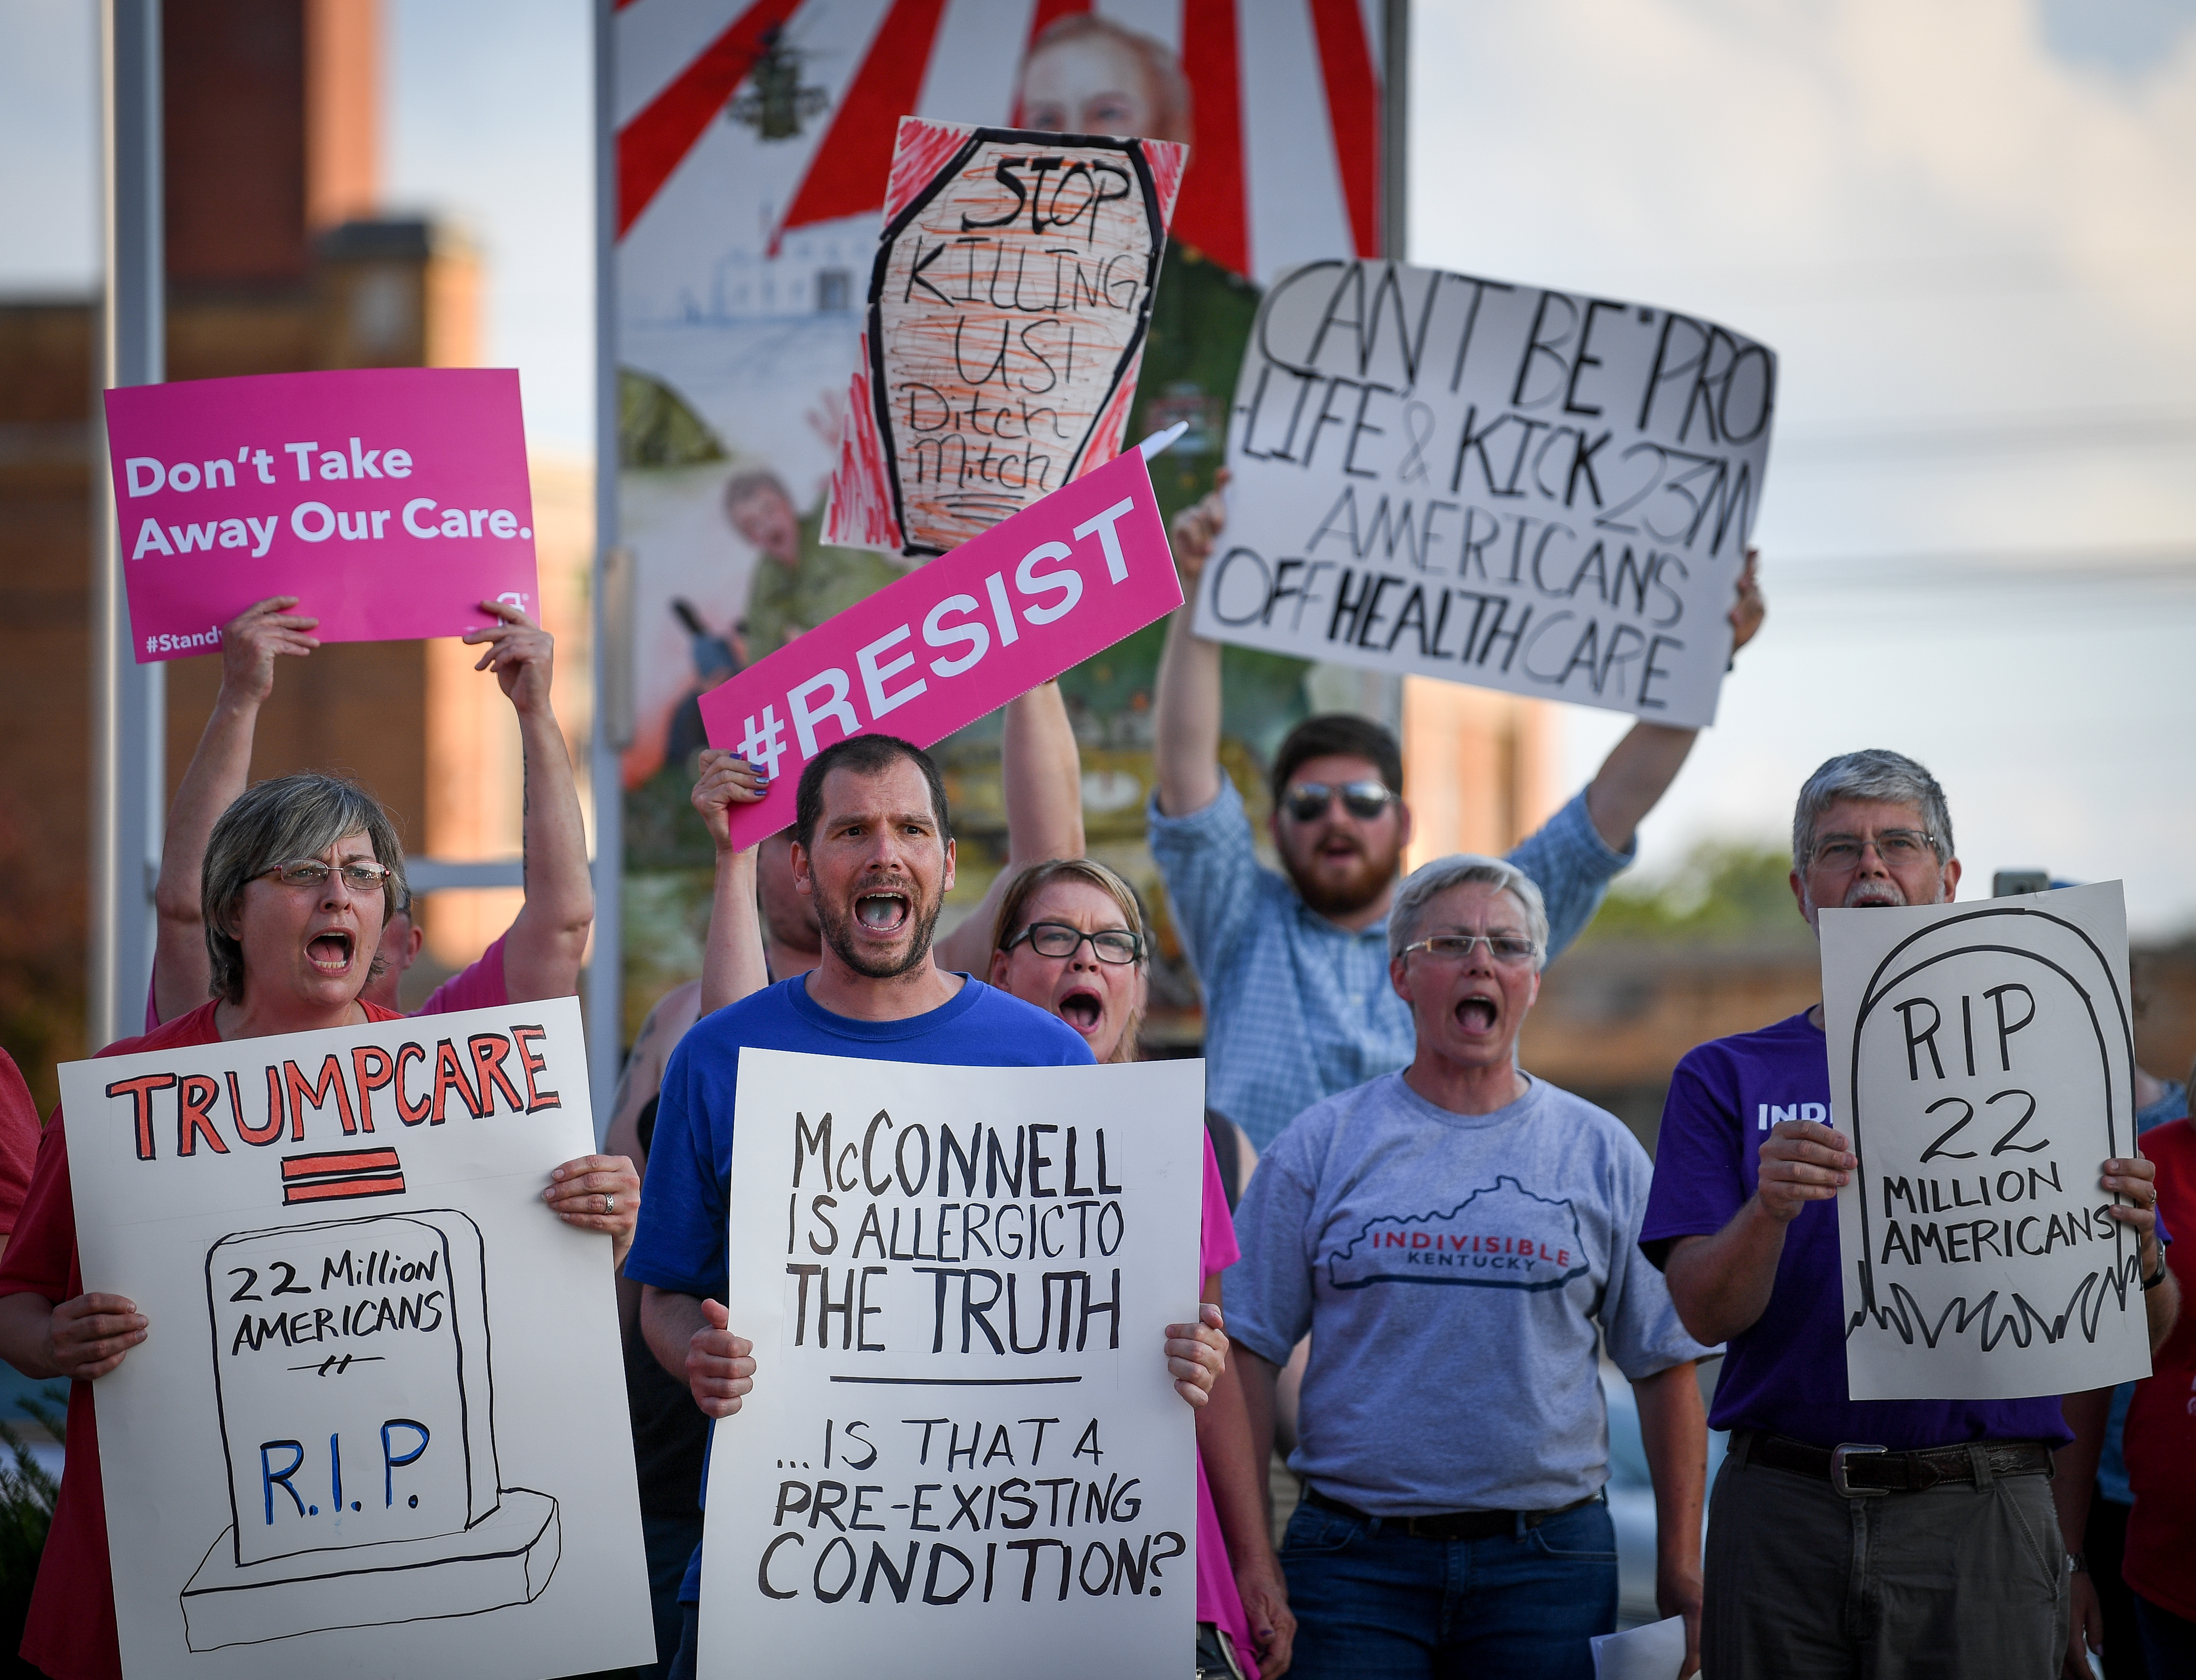 Protesters rally outside a Harden County Republican party fundraiser where Senate Majority Leader McConnell is scheduled to speak in Elizabethtown